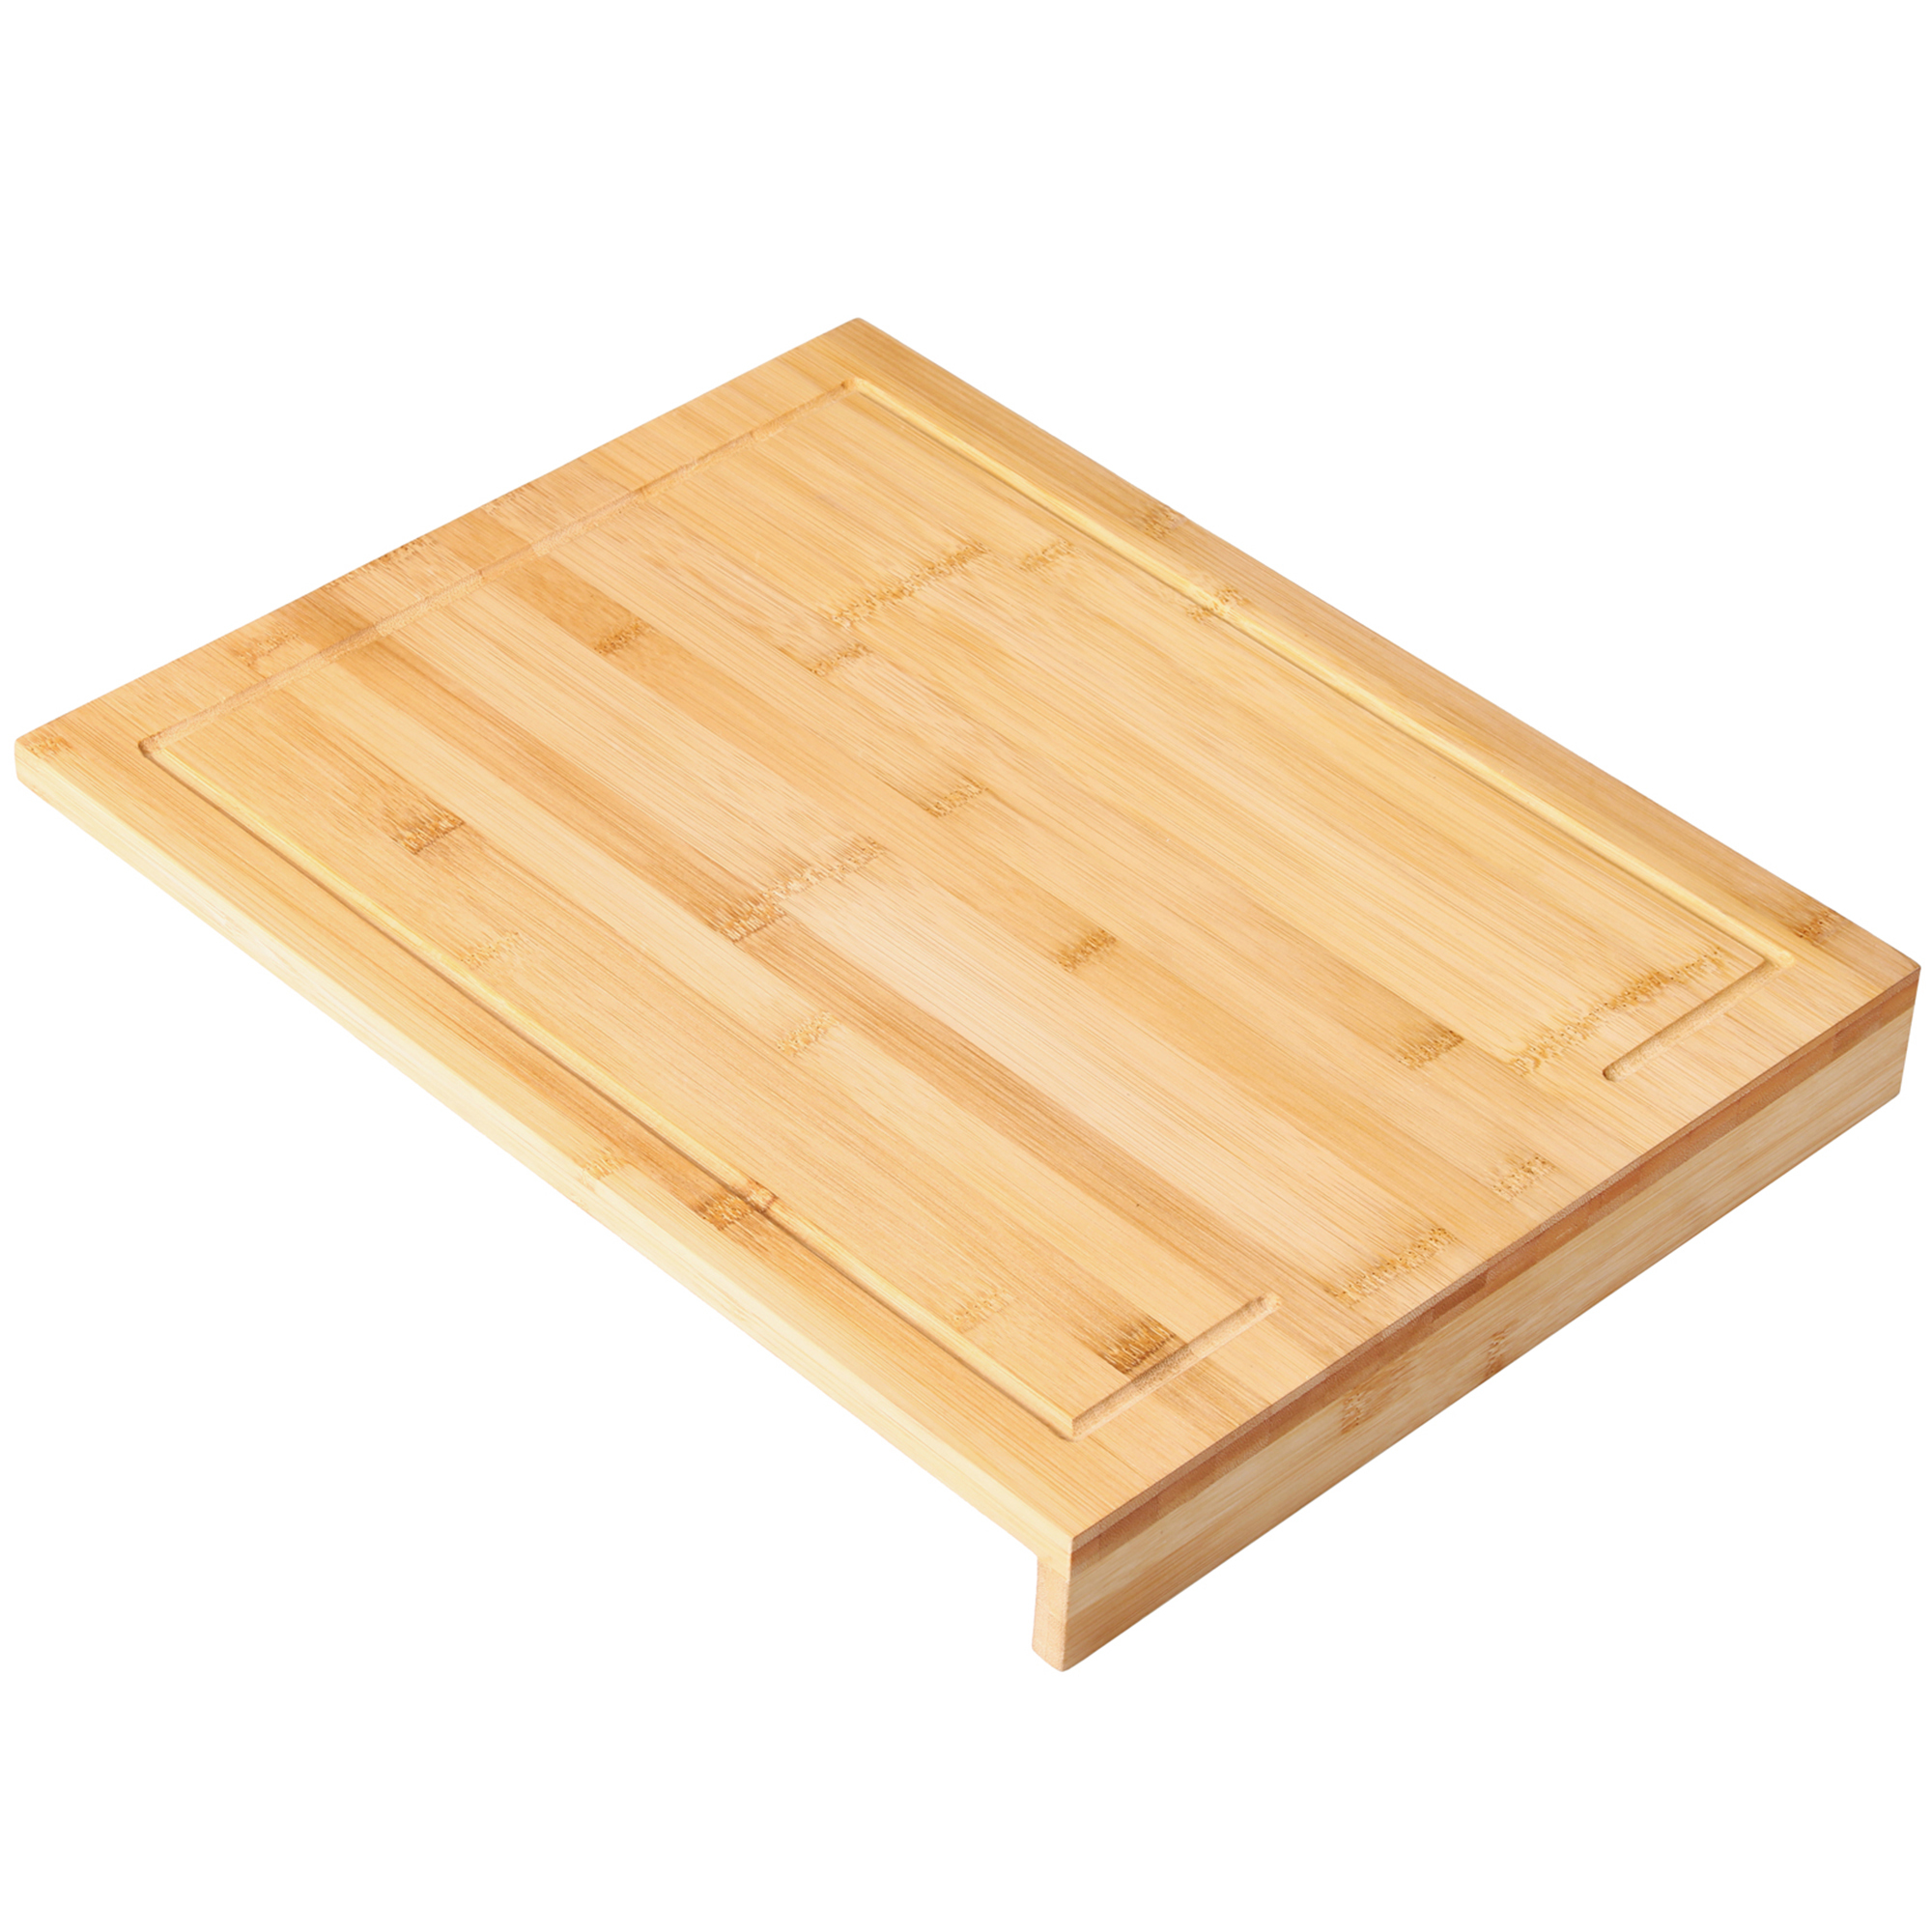 Gourmet Kitchen Gourmet Kitchen Bamboo Cutting Board With Counter